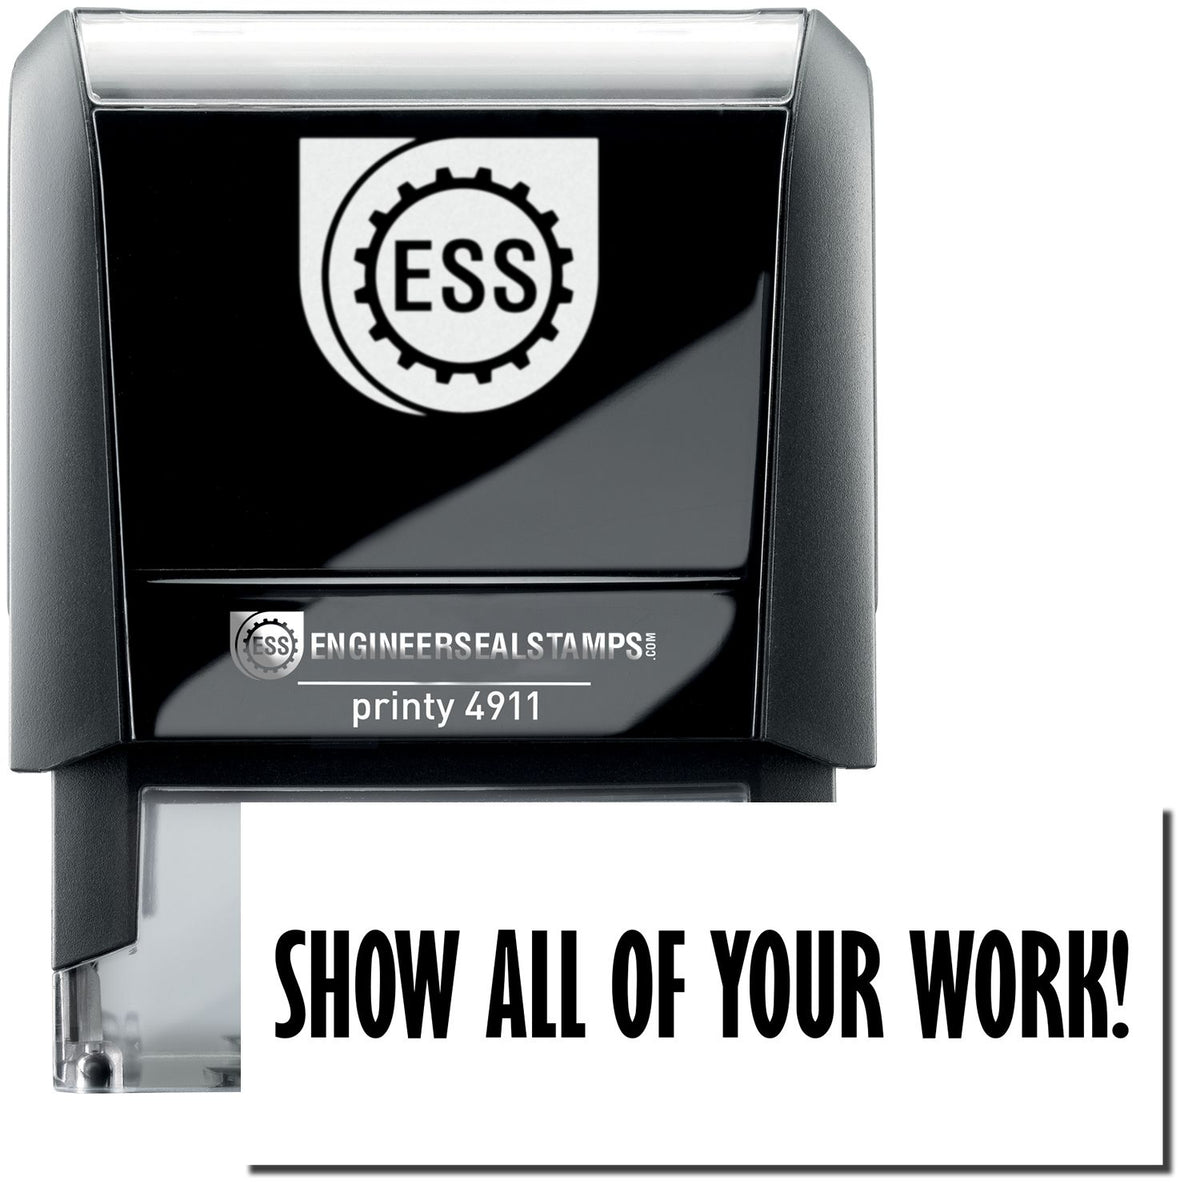 A self-inking stamp with a stamped image showing how the text &quot;SHOW ALL OF YOUR WORK!&quot; is displayed after stamping.